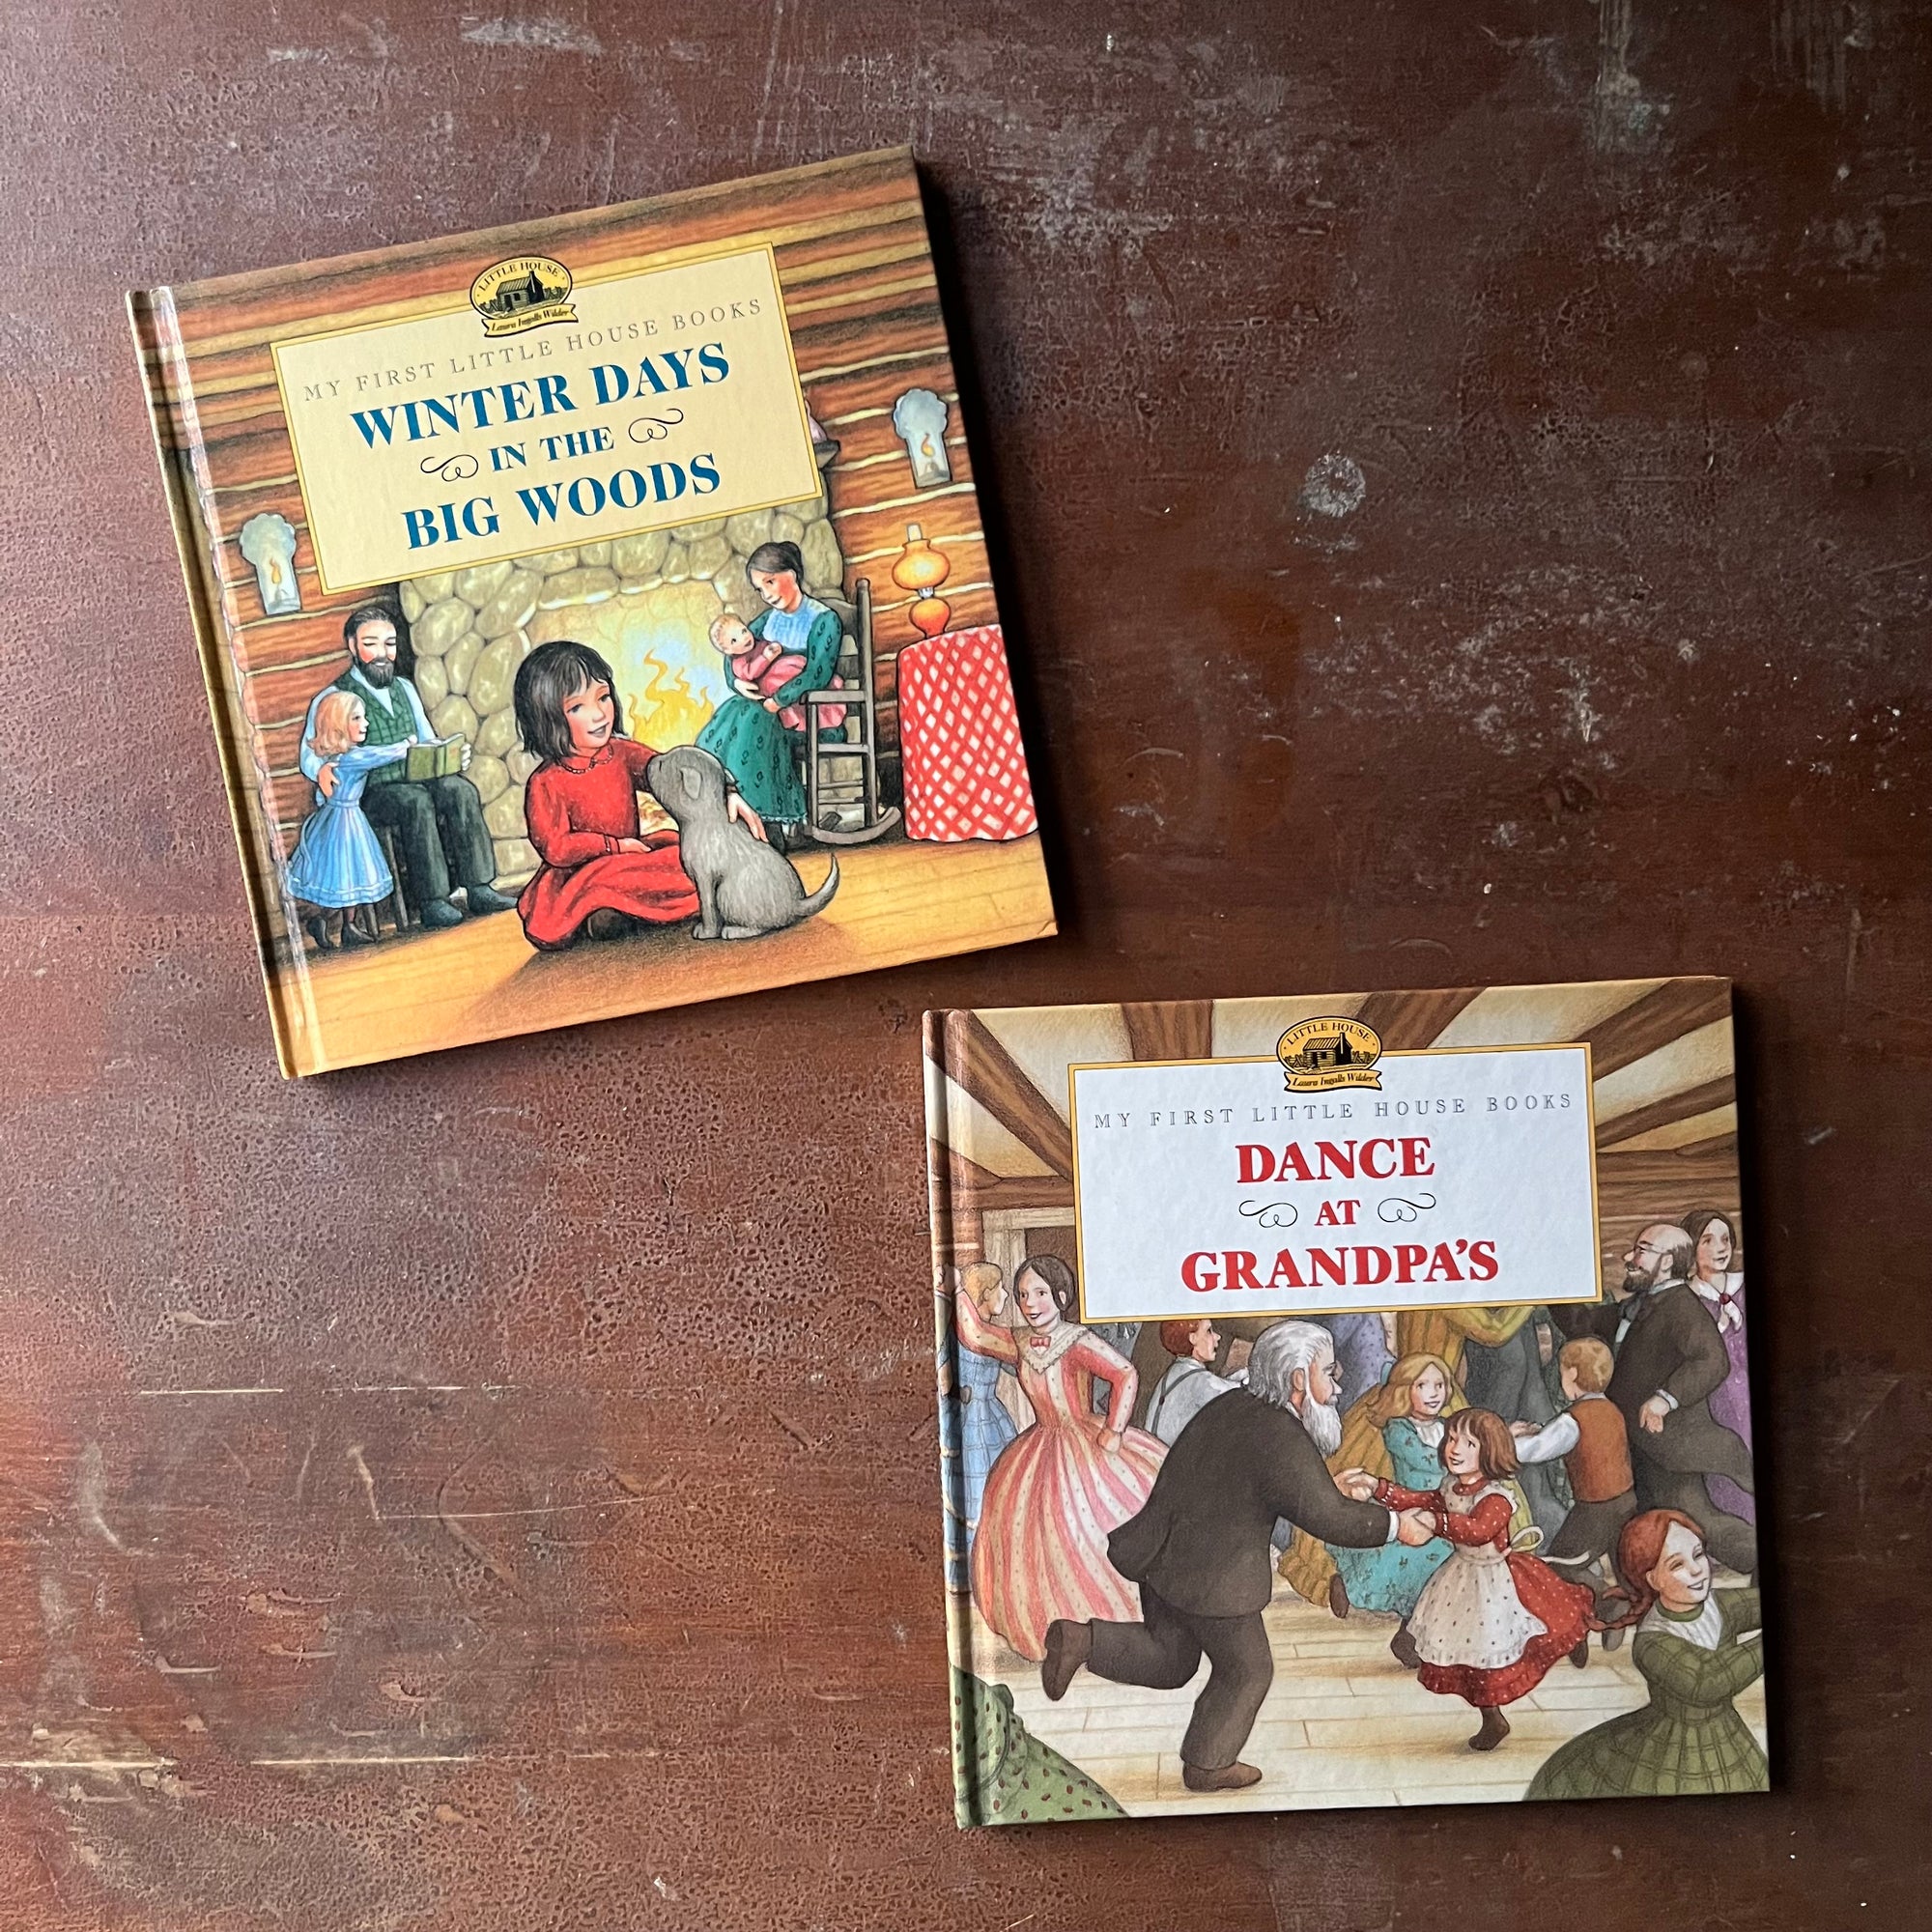 vintage picture books from Scholastic Inc. - My First Little House Books Set:  Winter Days in the Big Woods and Dance at Grandpa's written by Laura Ingalls Wilder with illustrations by Renee Graef - view of the front covers